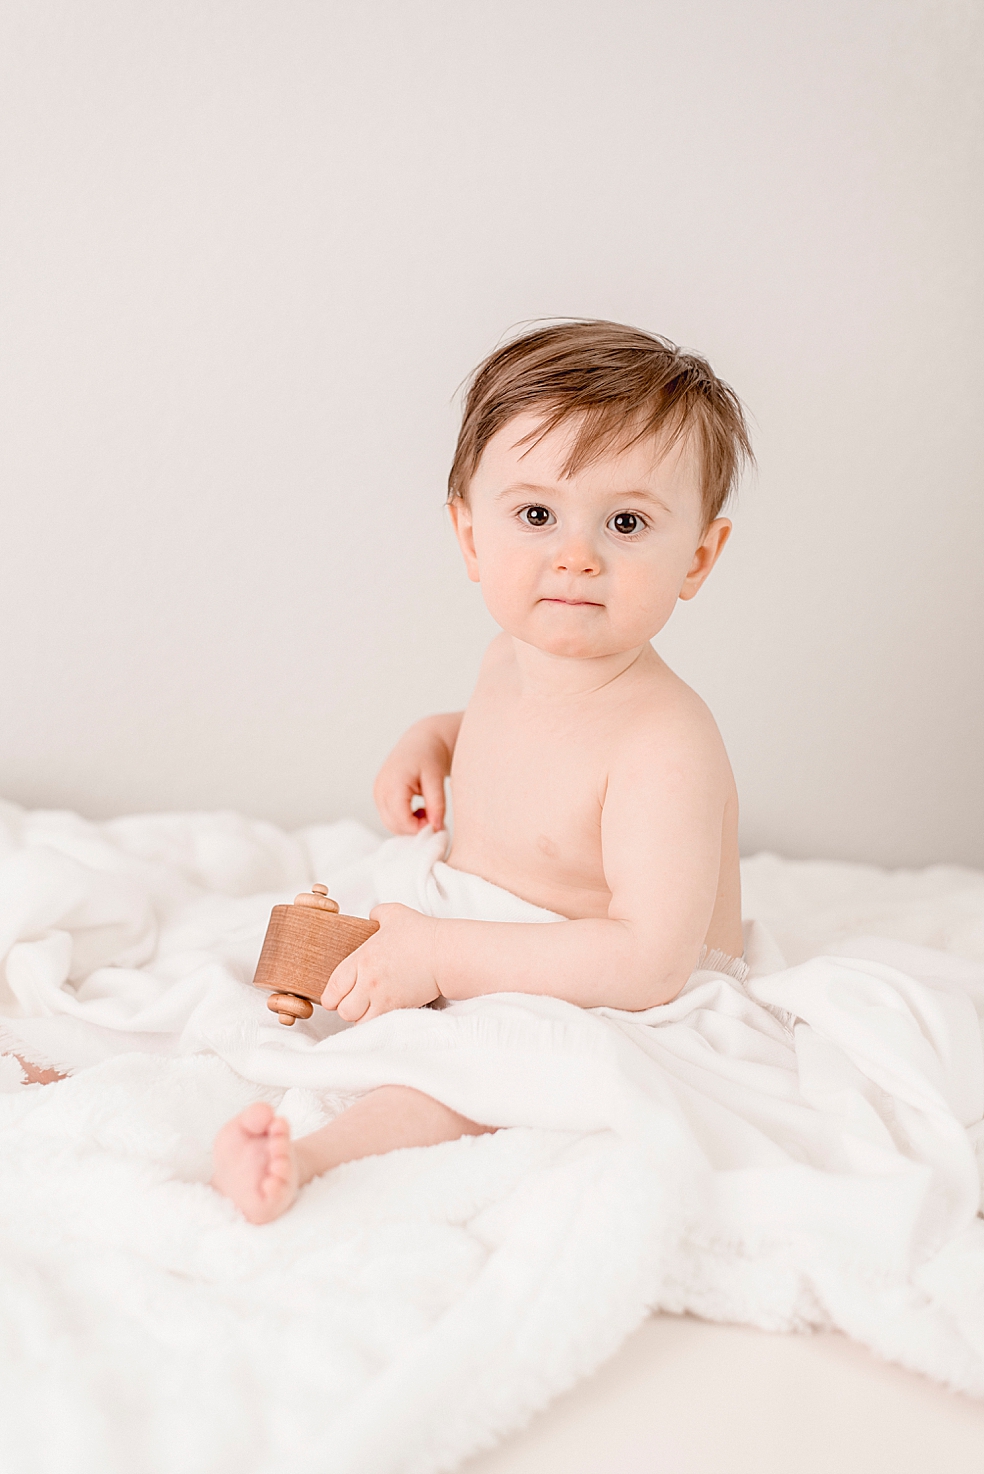 Baby boy in a white blanket playing with wooden toys | Photo by Jessica Lee Photography